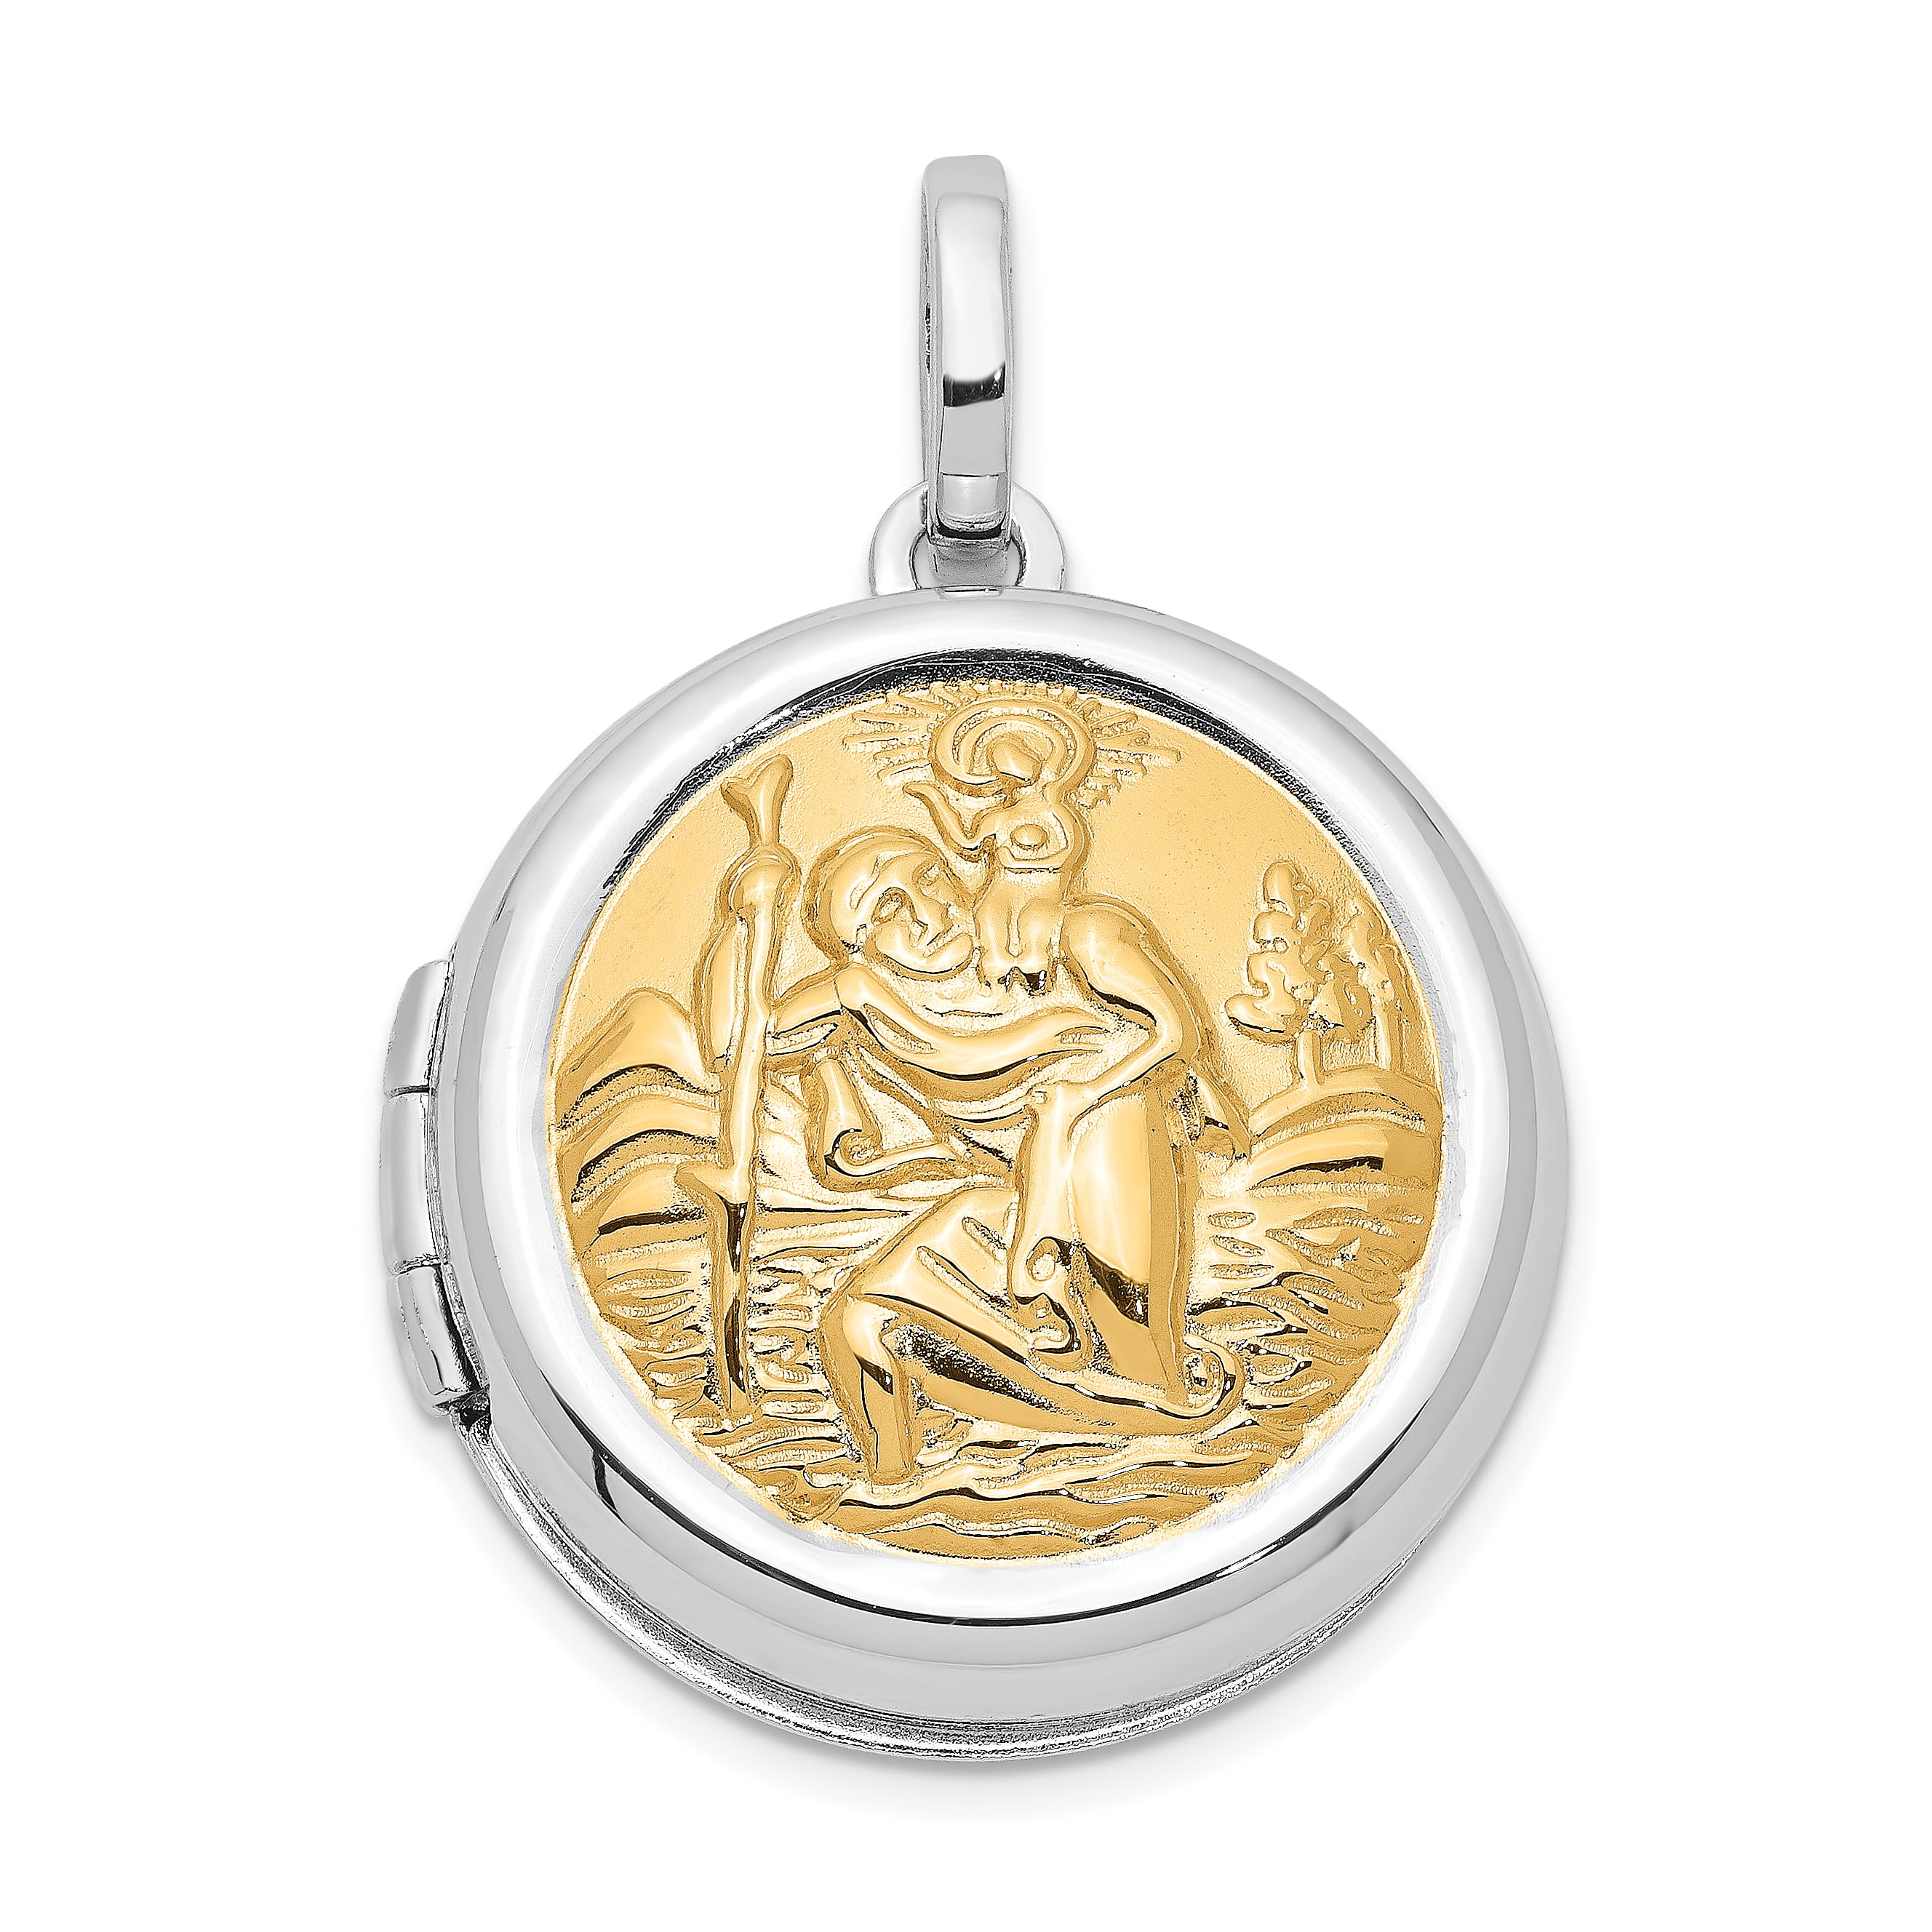 37mm Silver Yellow Plated Body Builder Charm 